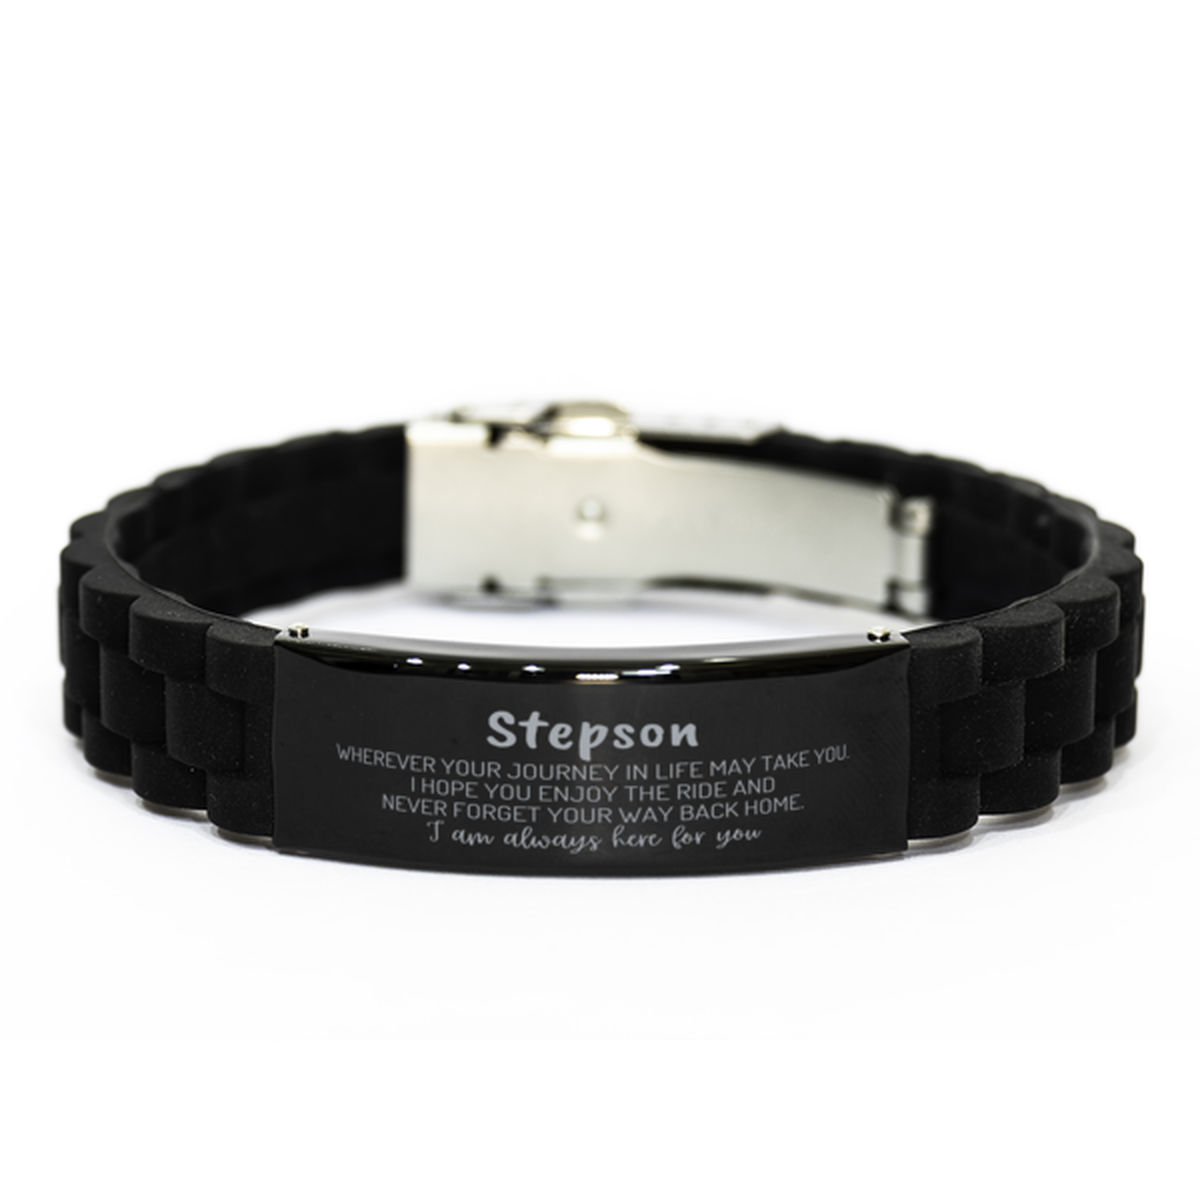 Stepson wherever your journey in life may take you, I am always here for you Stepson Black Glidelock Clasp Bracelet, Awesome Christmas Gifts For Stepson, Stepson Birthday Gifts for Men Women Family Loved One